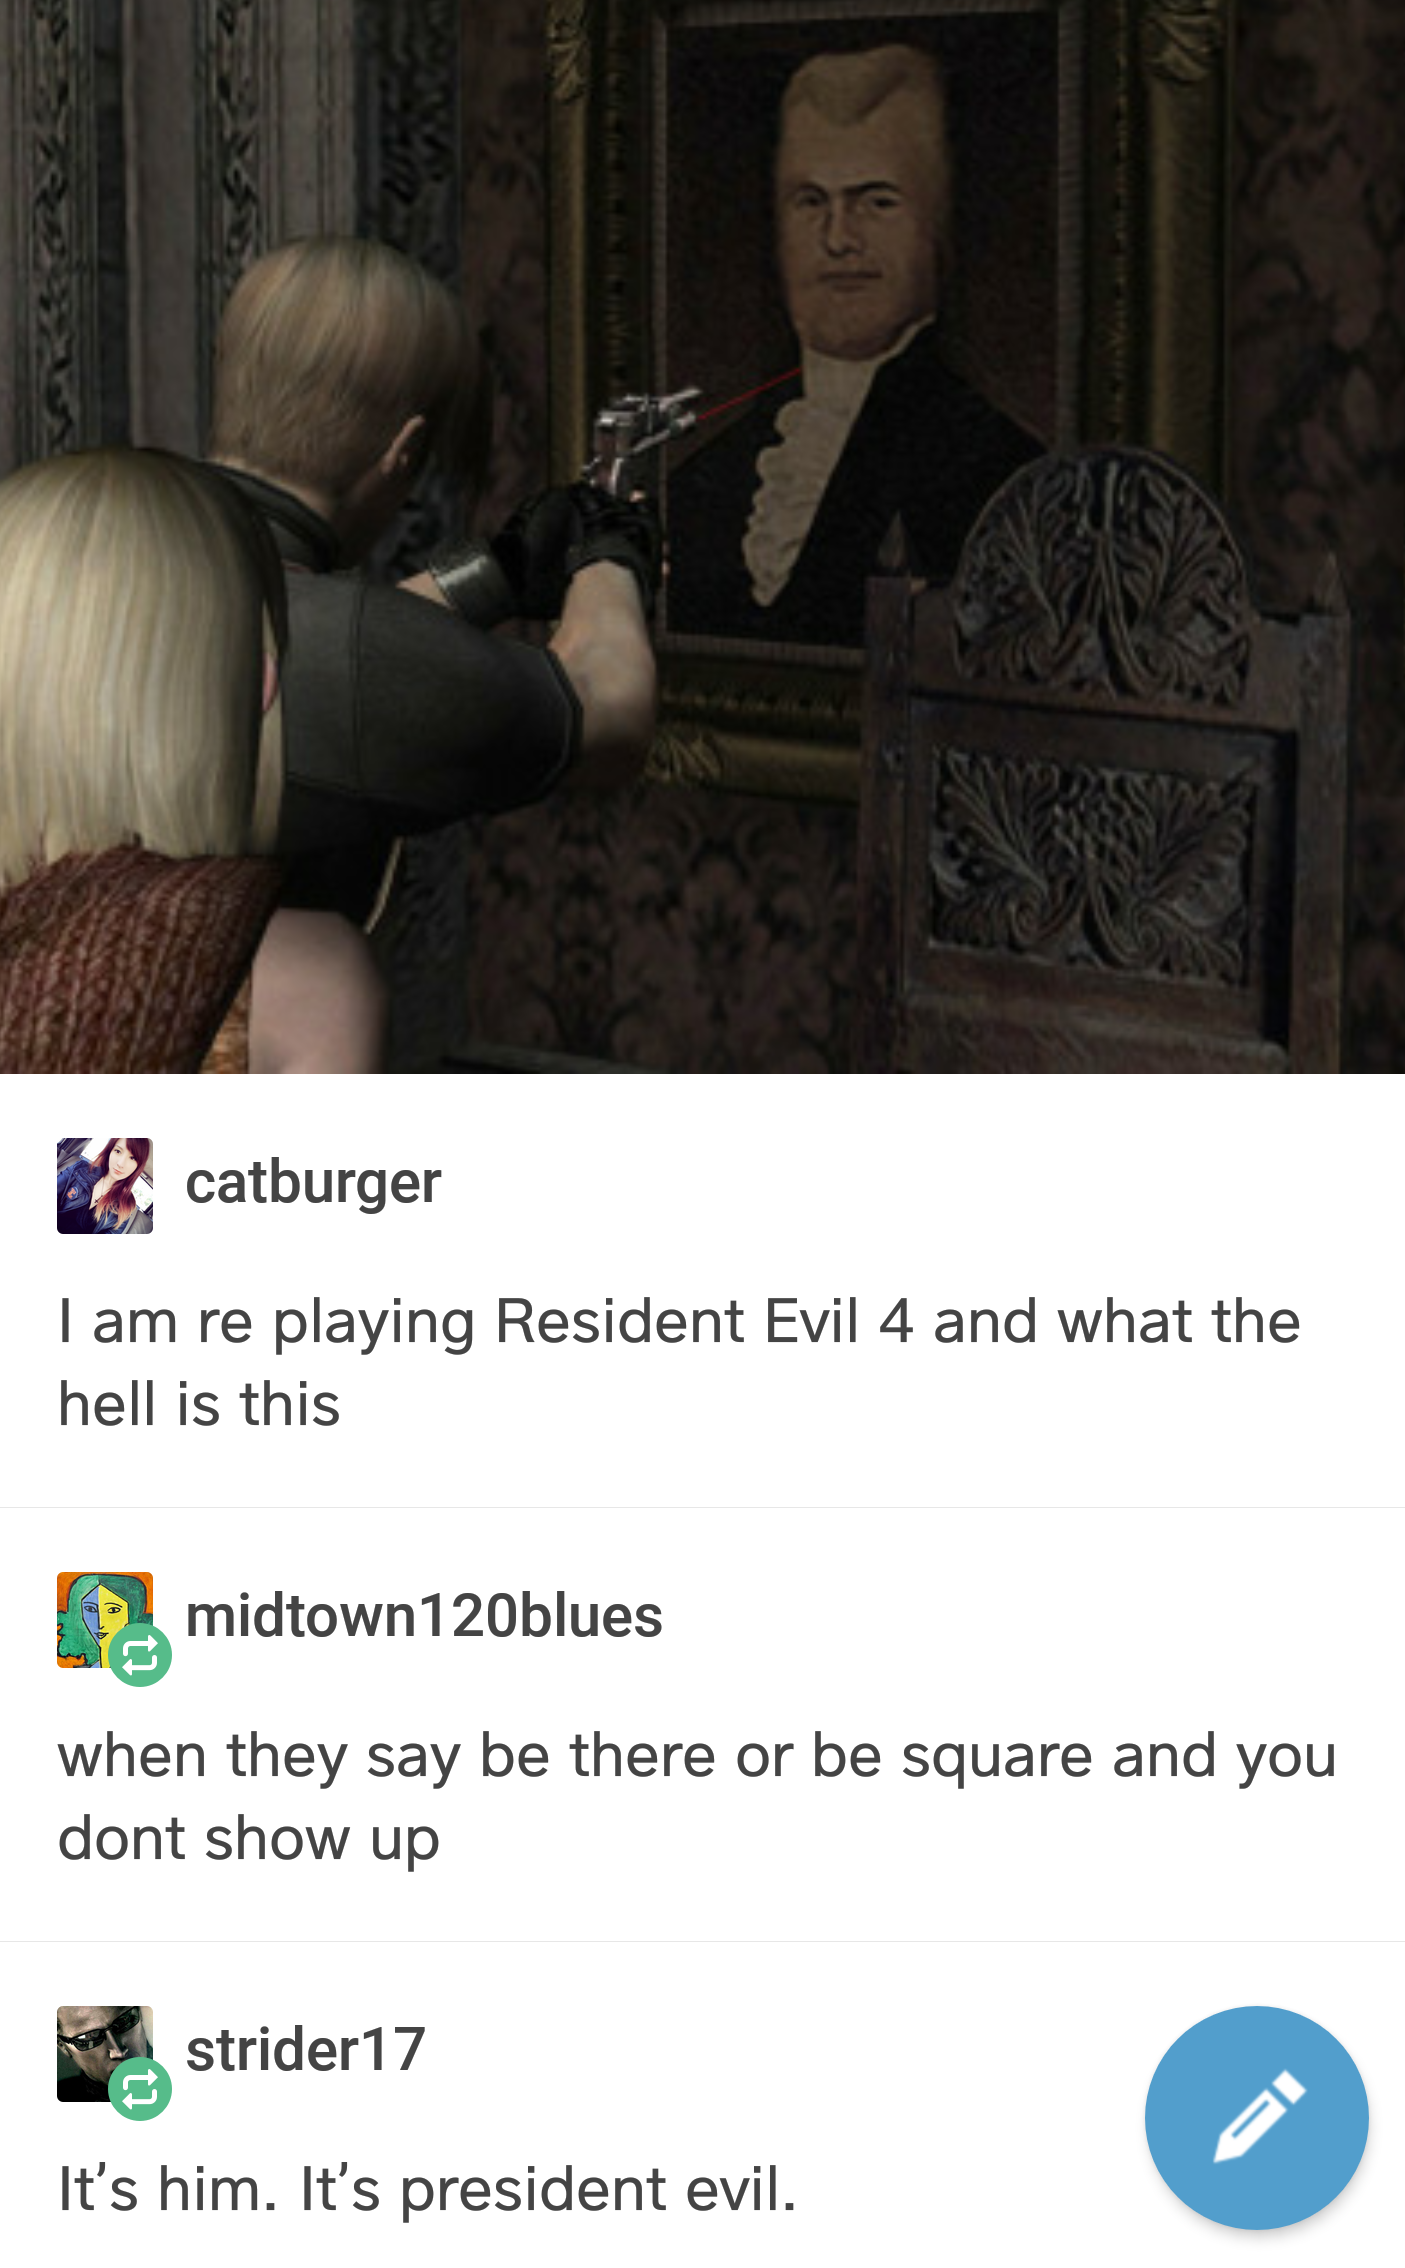 photo caption - 2 catburger I am re playing Resident Evil 4 and what the hell is this D. midtown 120blues when they say be there or be square and you dont show up strider 17 It's him. It's president evil.